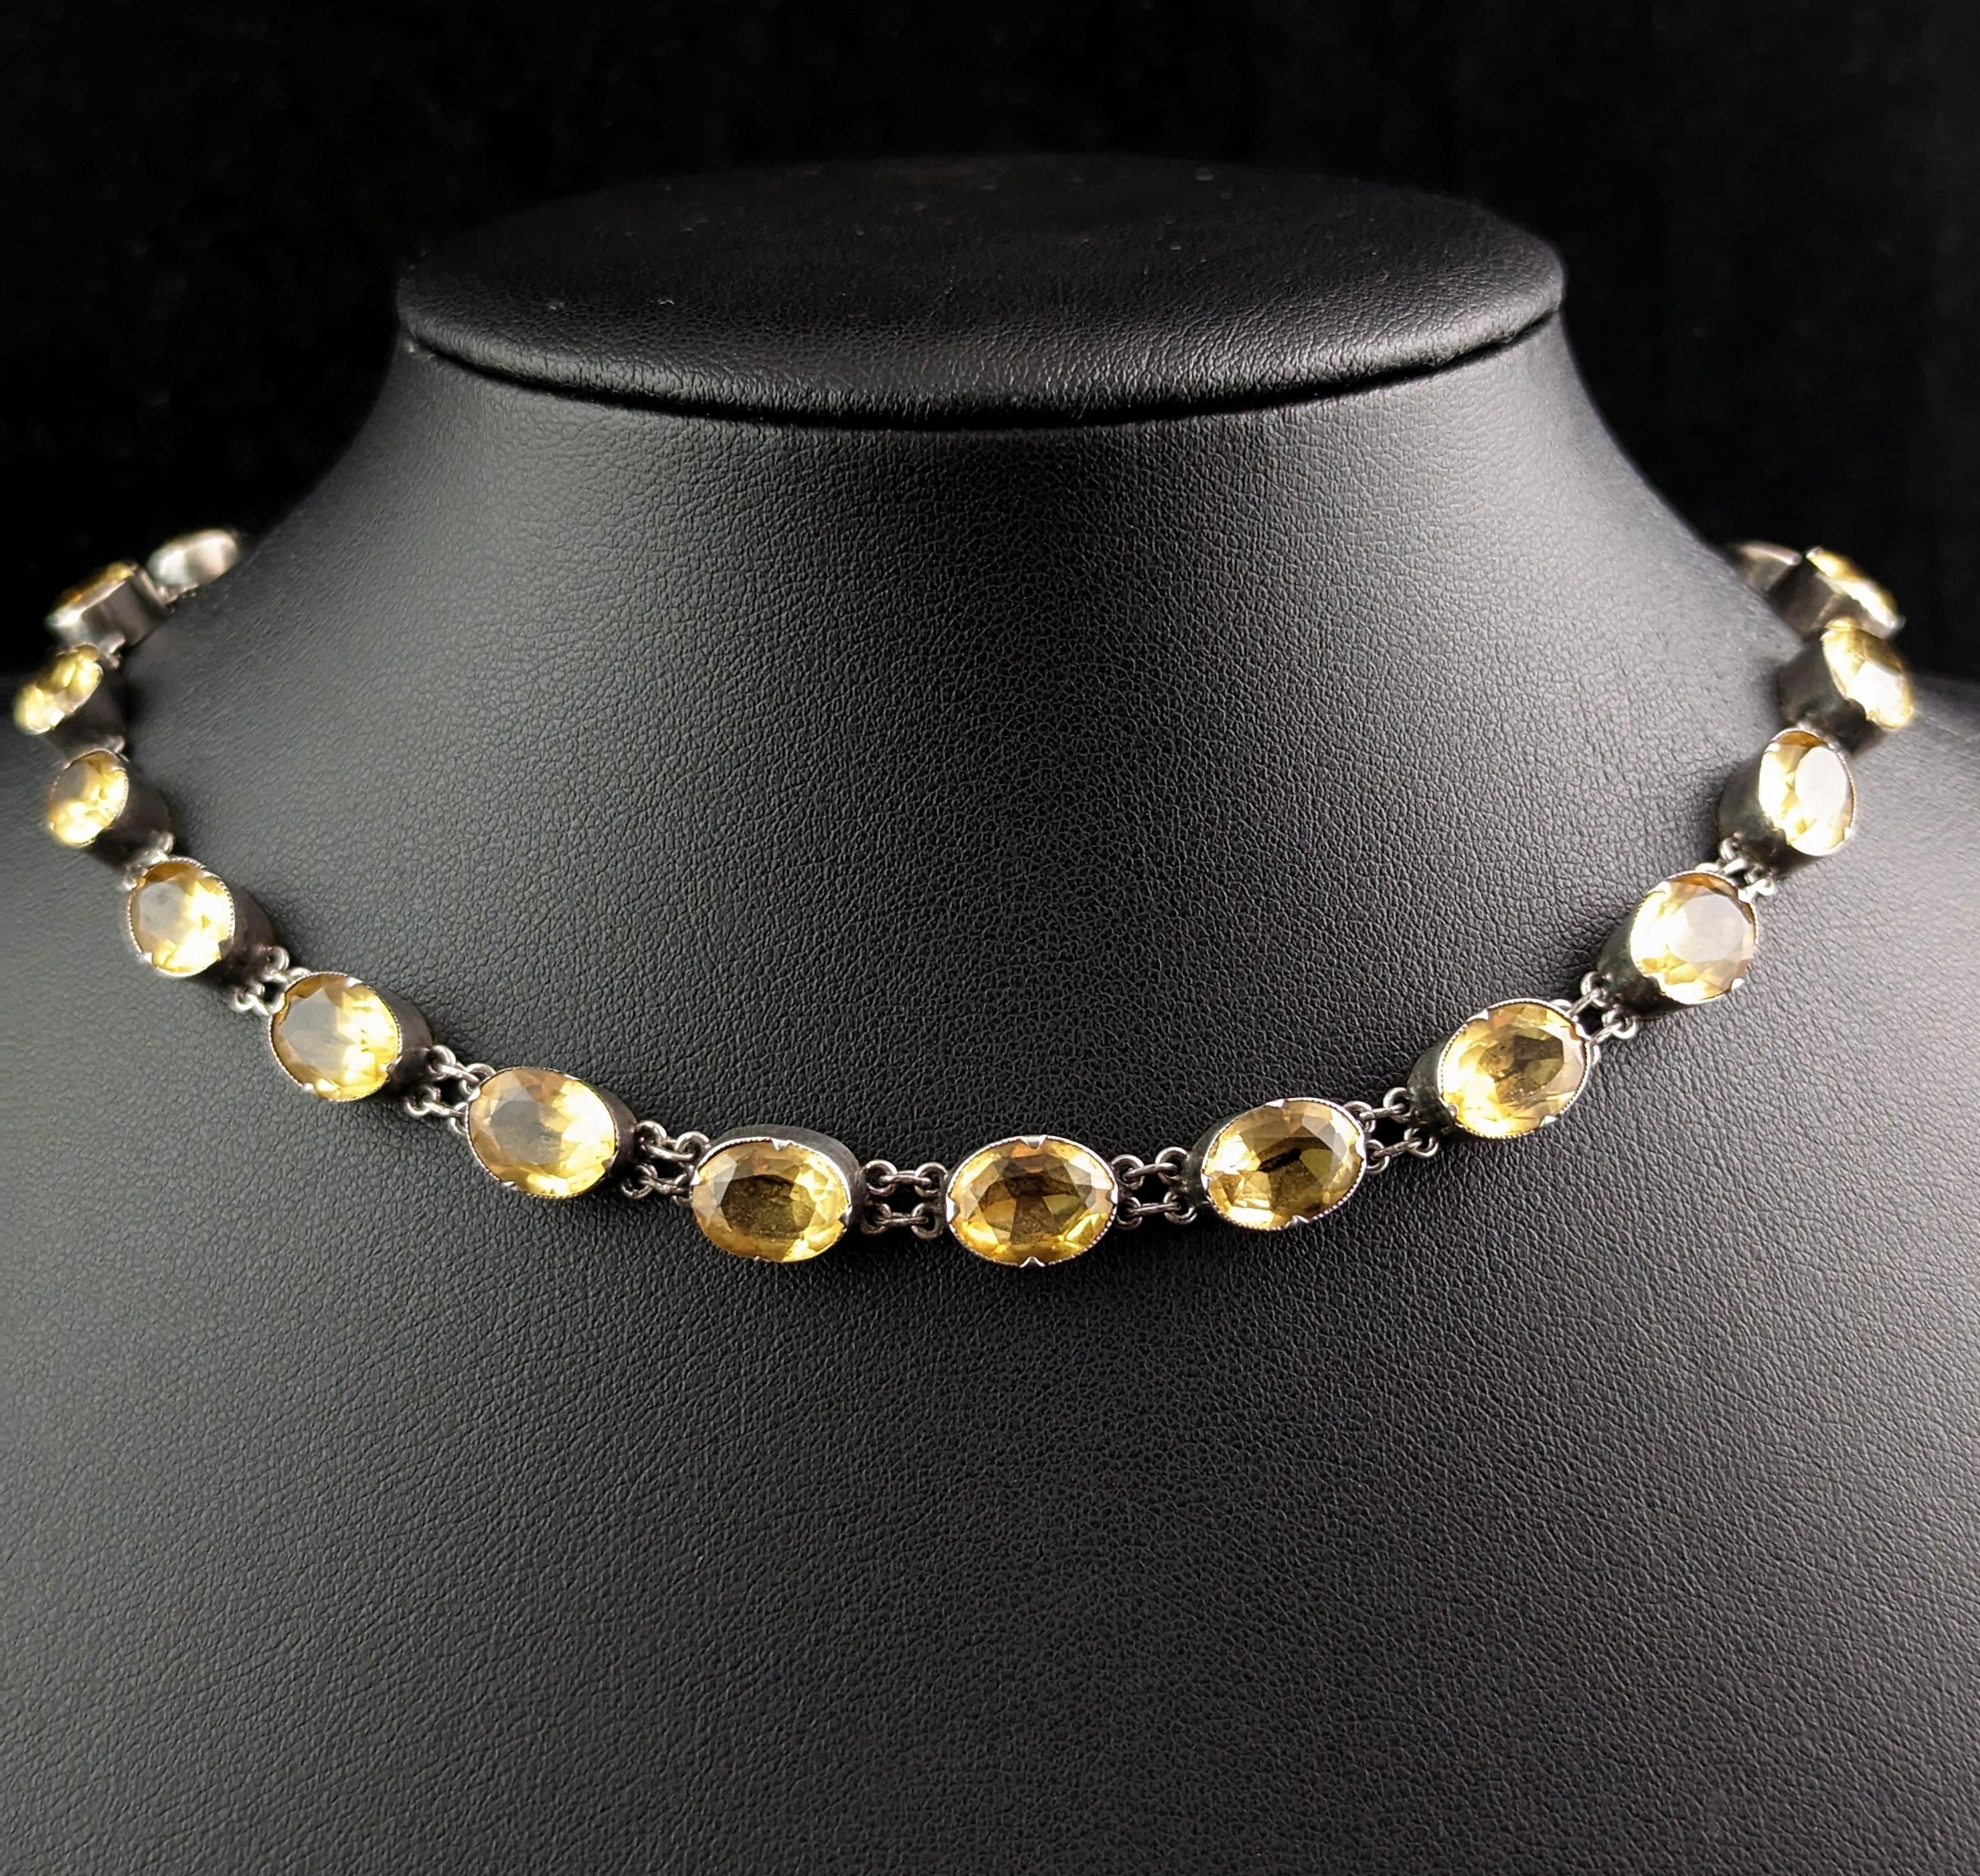 An antique Riviere necklace is certainly a wonderful addition to any antique jewellery collection and this wonderful early 19th century citrine example is no exception!

She is made from sterling silver set with pretty graduated citrine stones, each